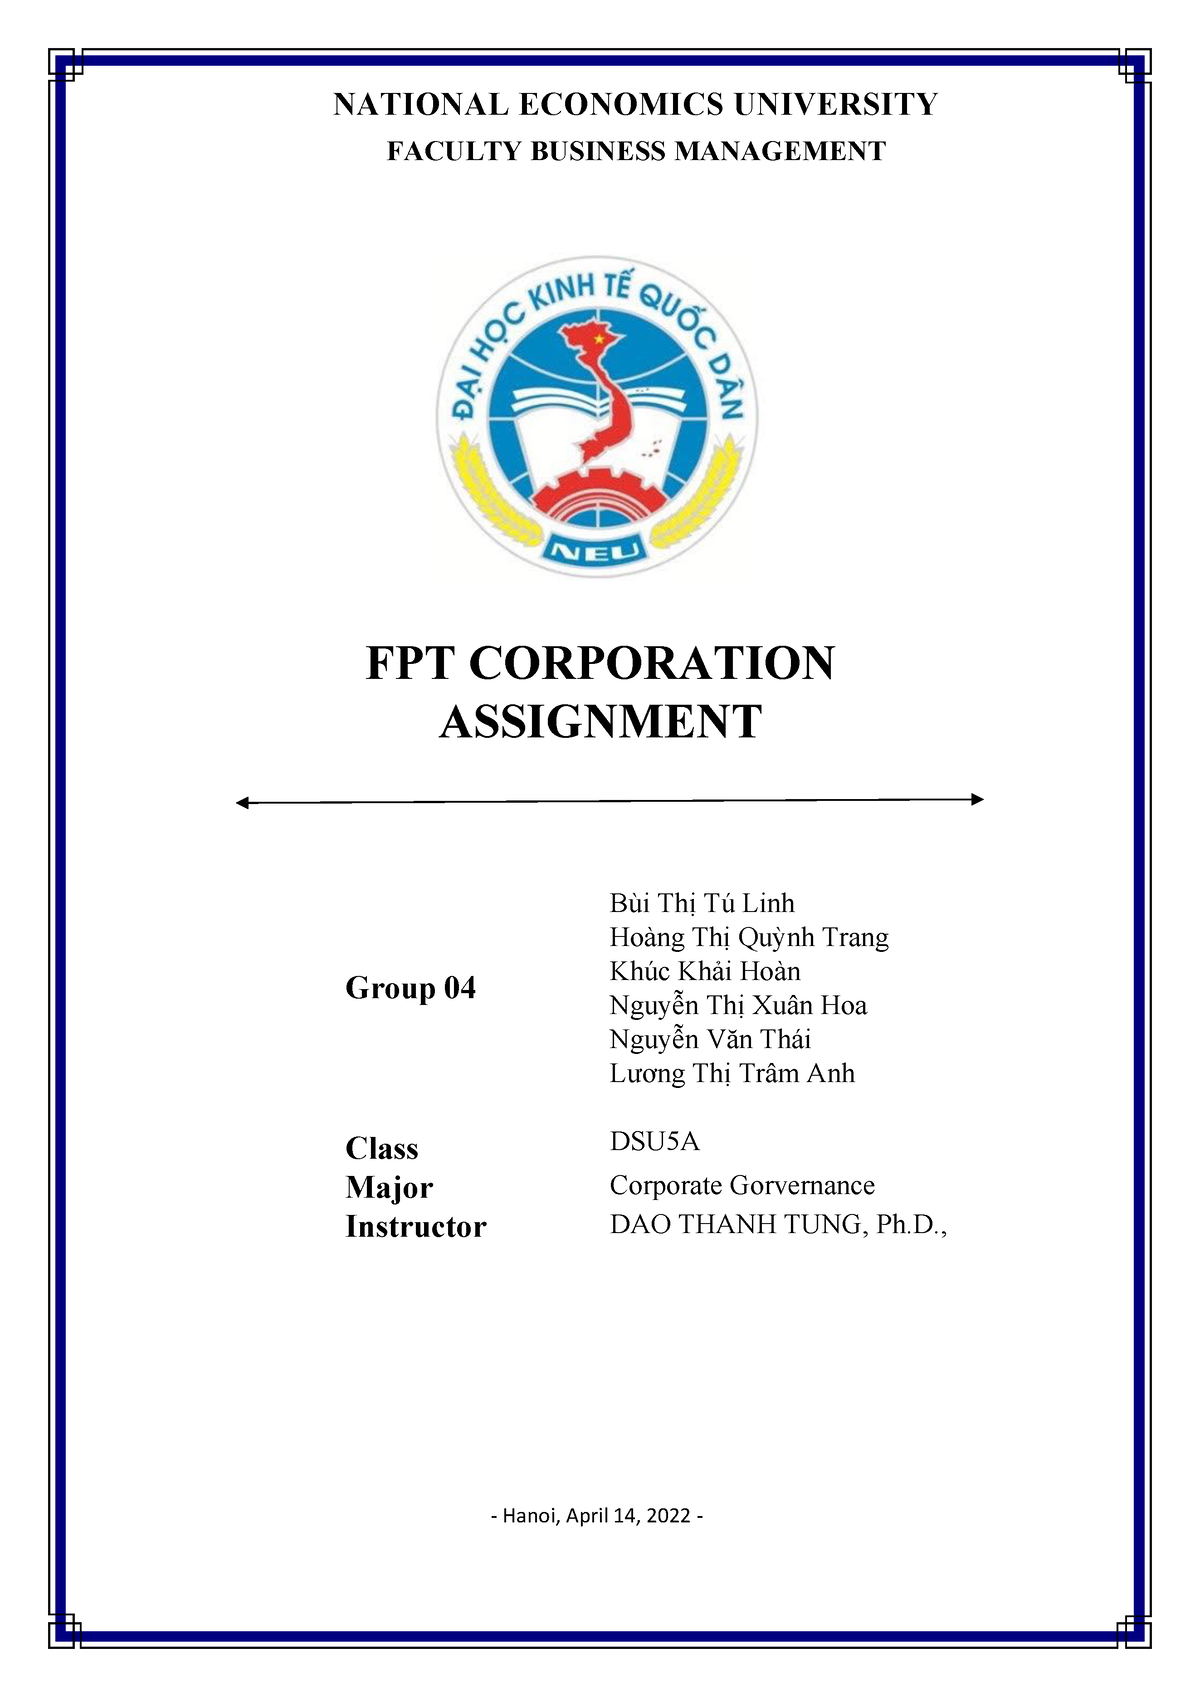 The Internal Governance Structure of FPT